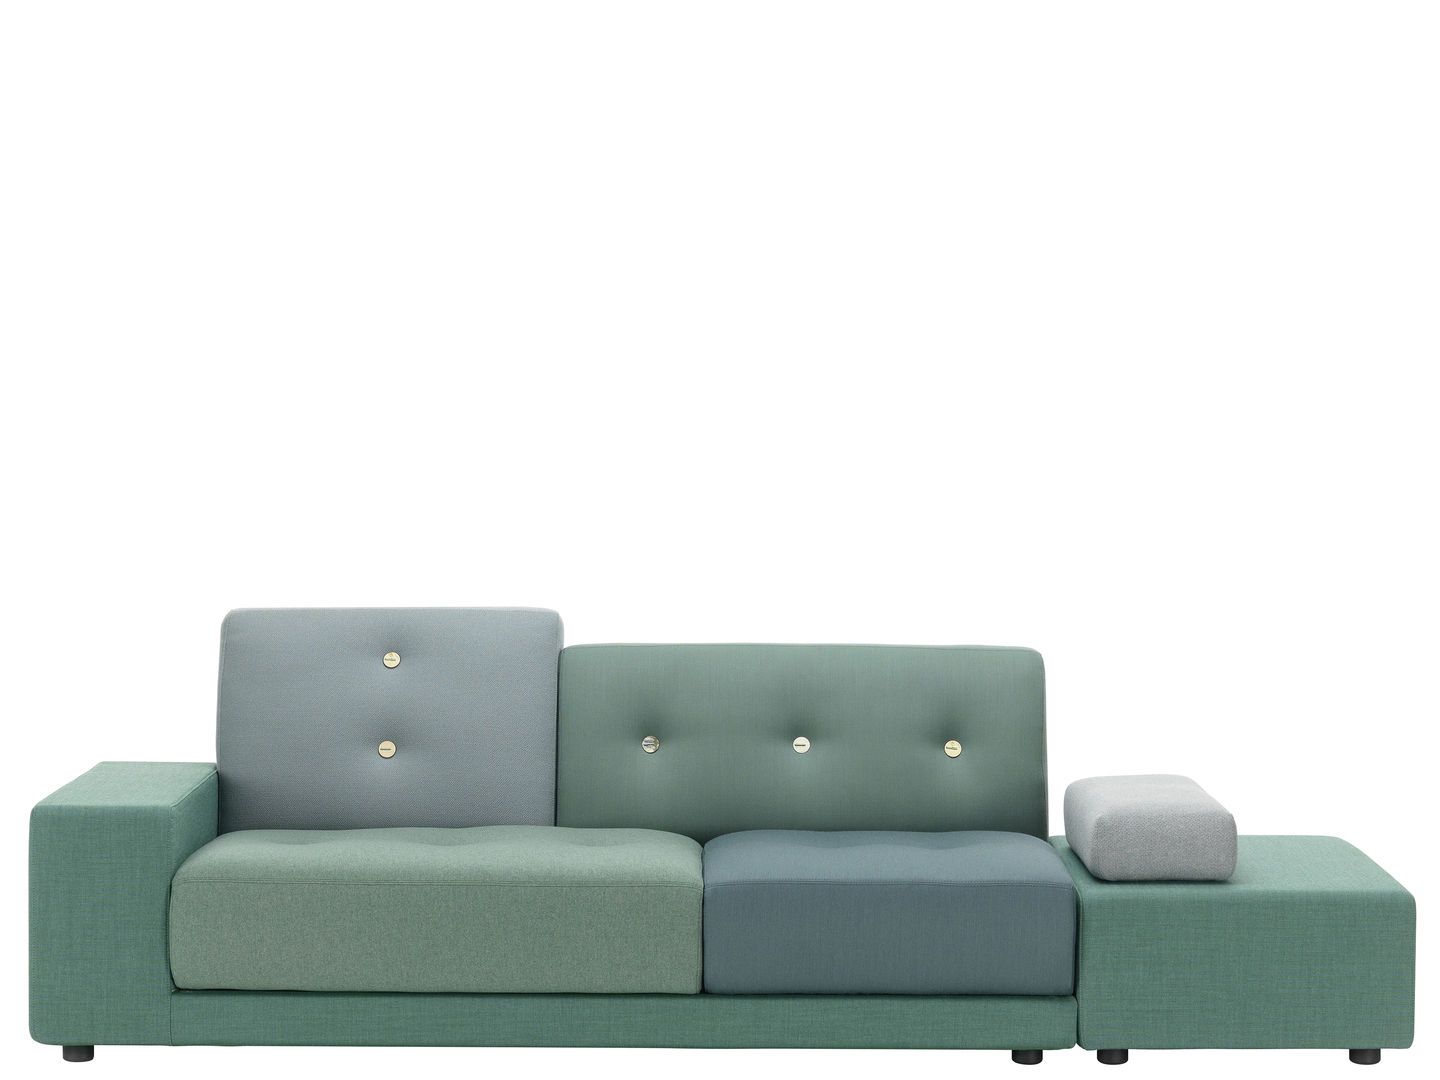 Vitra Polder Sofa - Modern Design with Comfort and Style